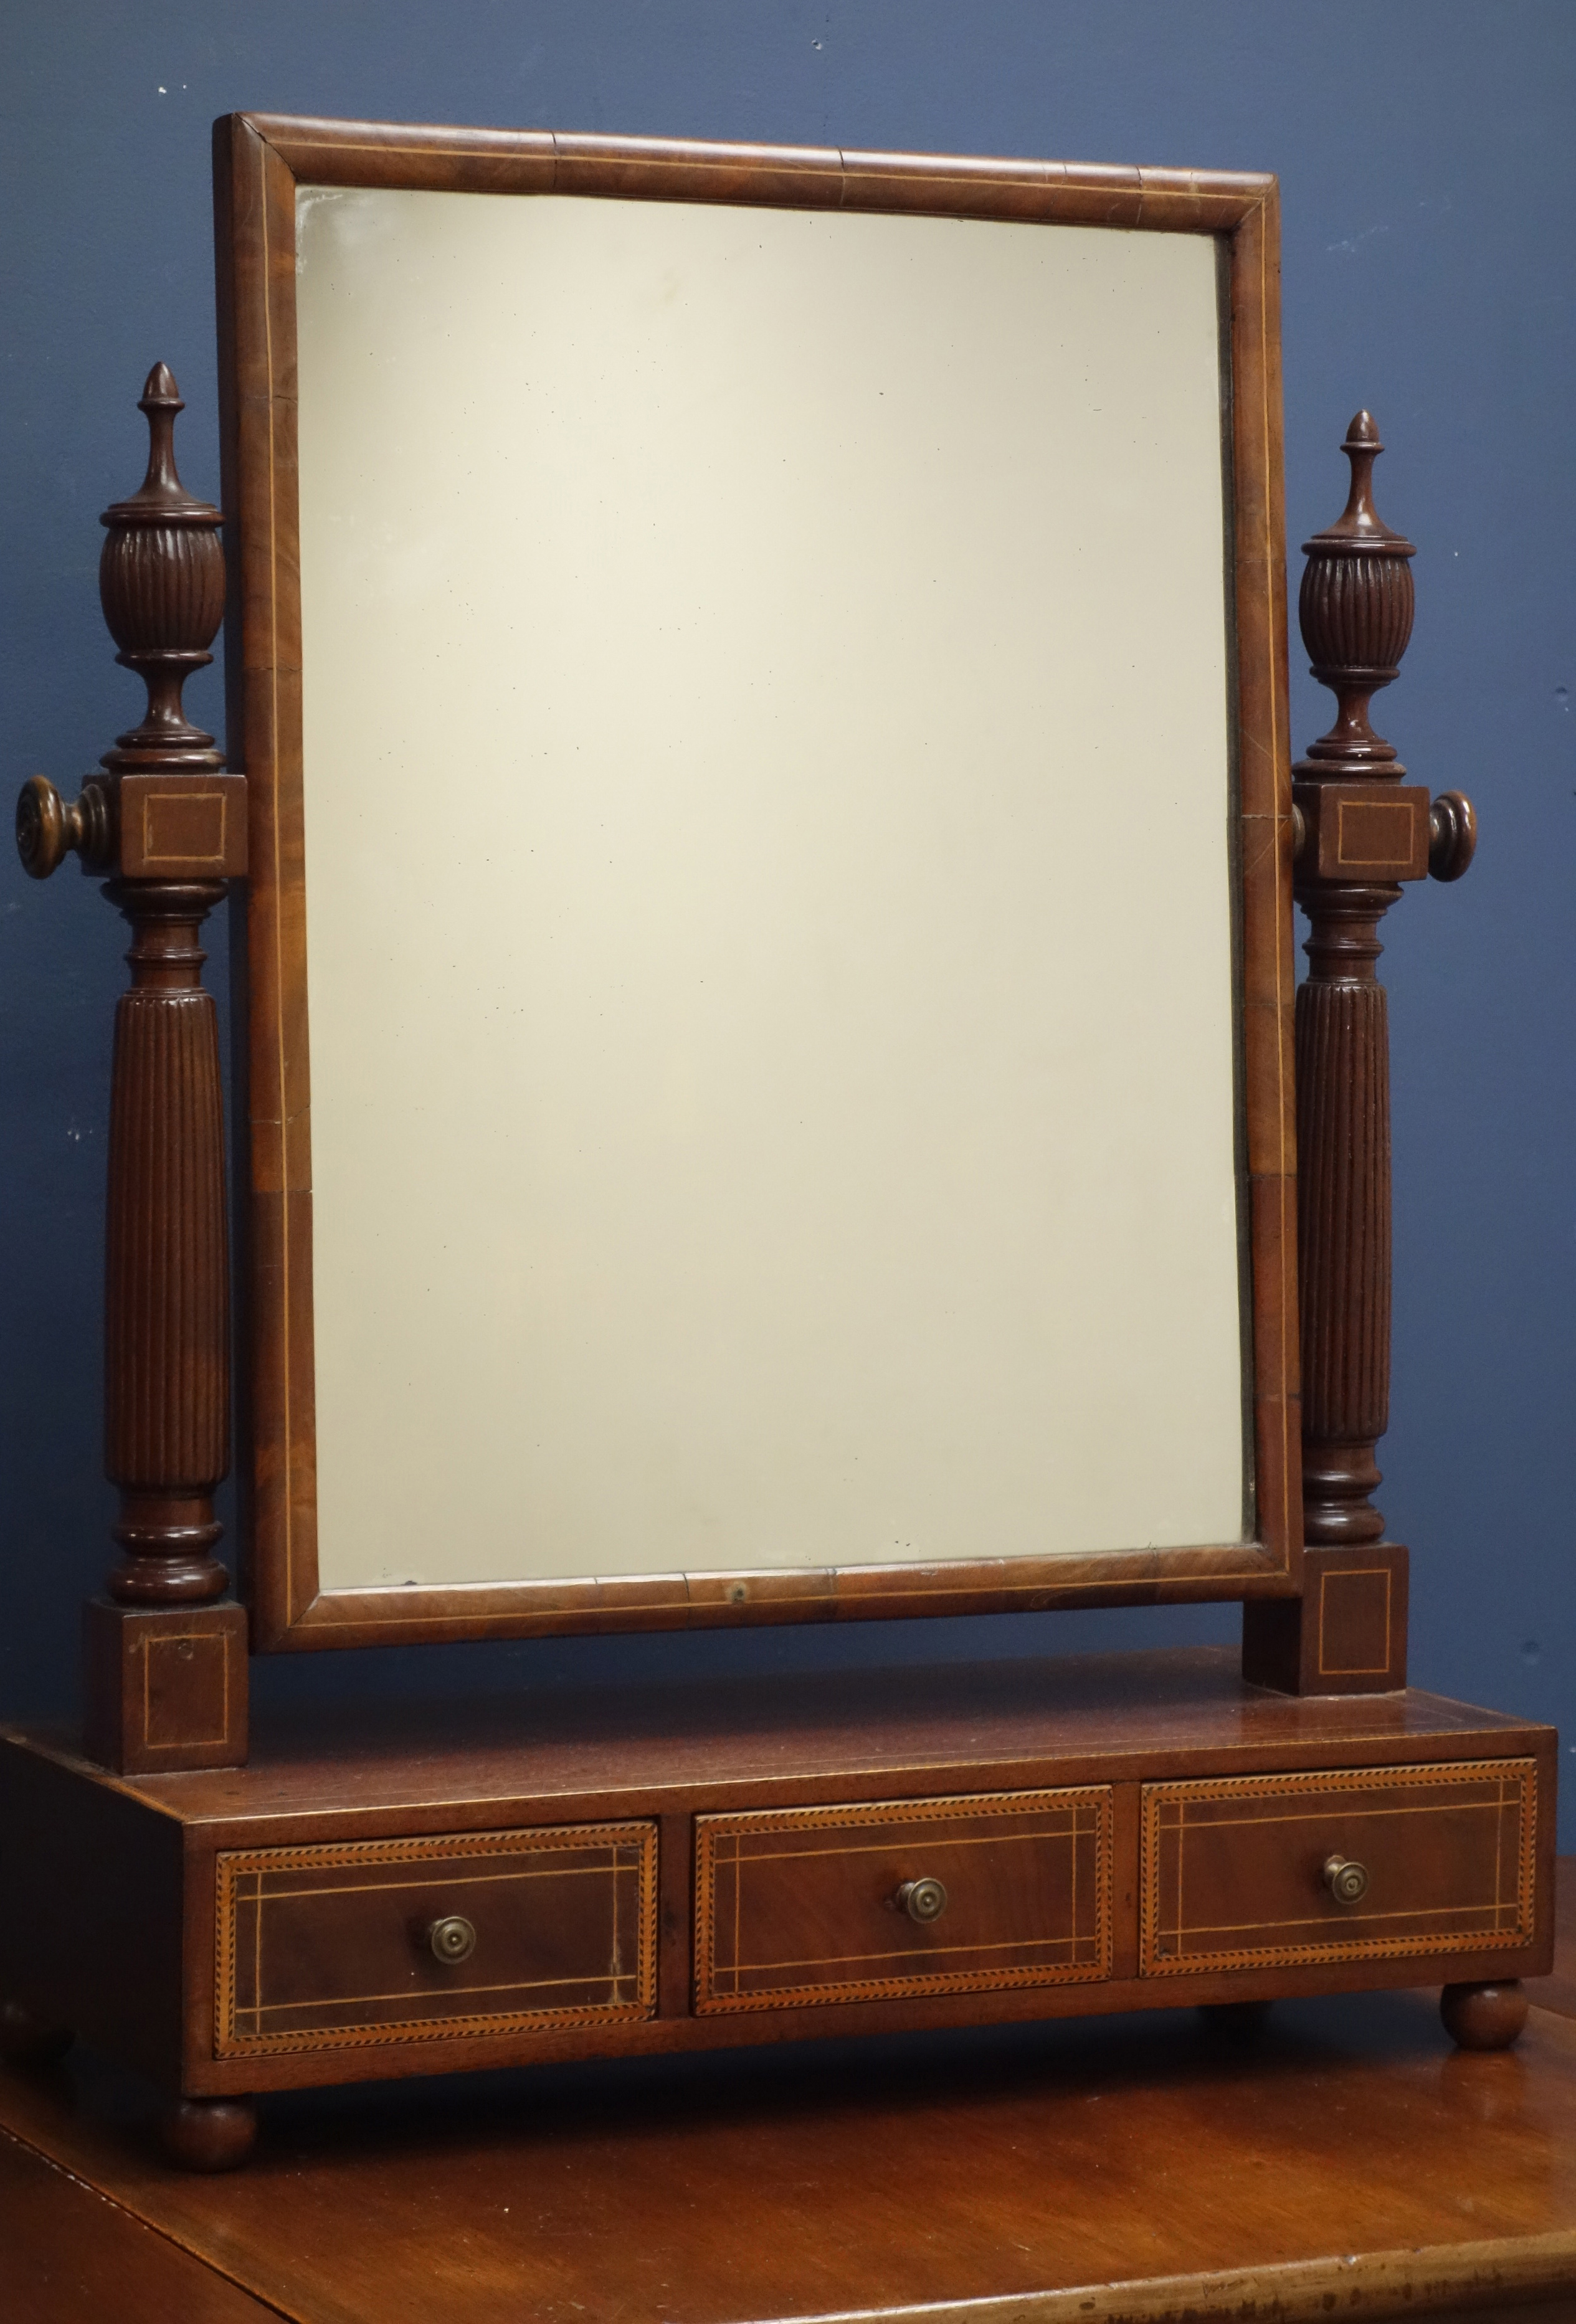 19th century inlaid mahogany toilet mirror, upright plate on fluted supports,